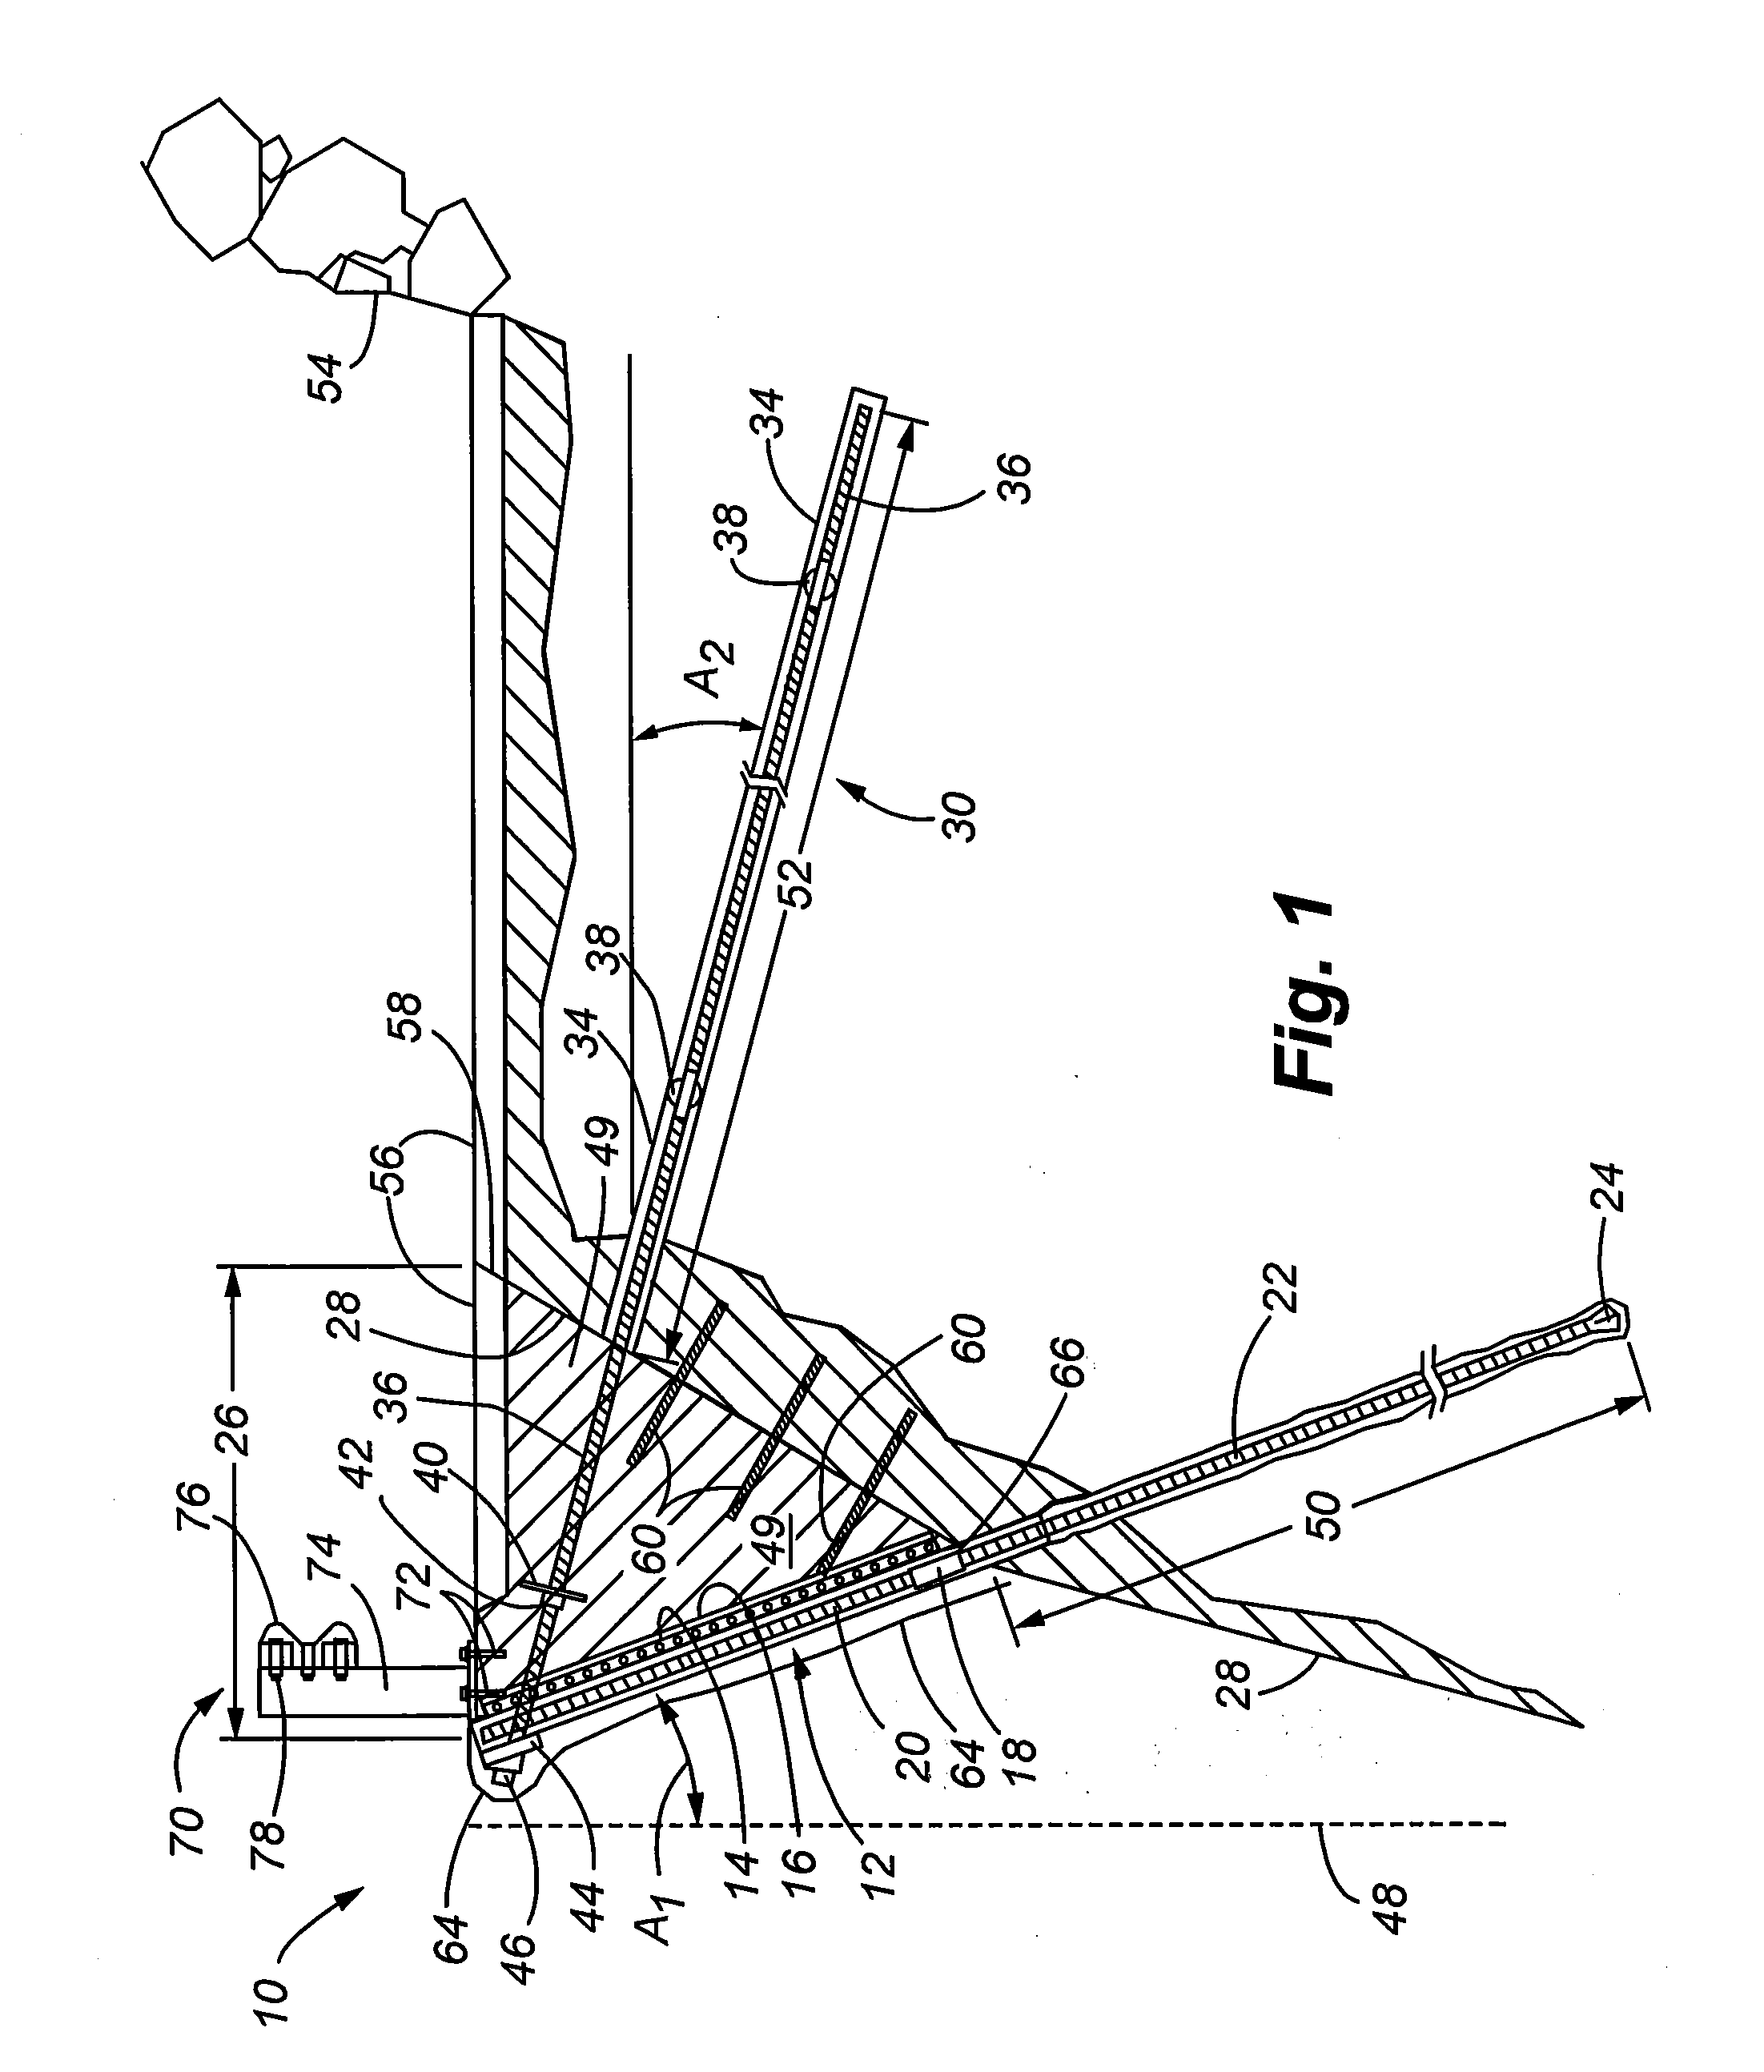 System and method for increasing roadway width incorporating a reverse oriented retaining wall and soil nail supports